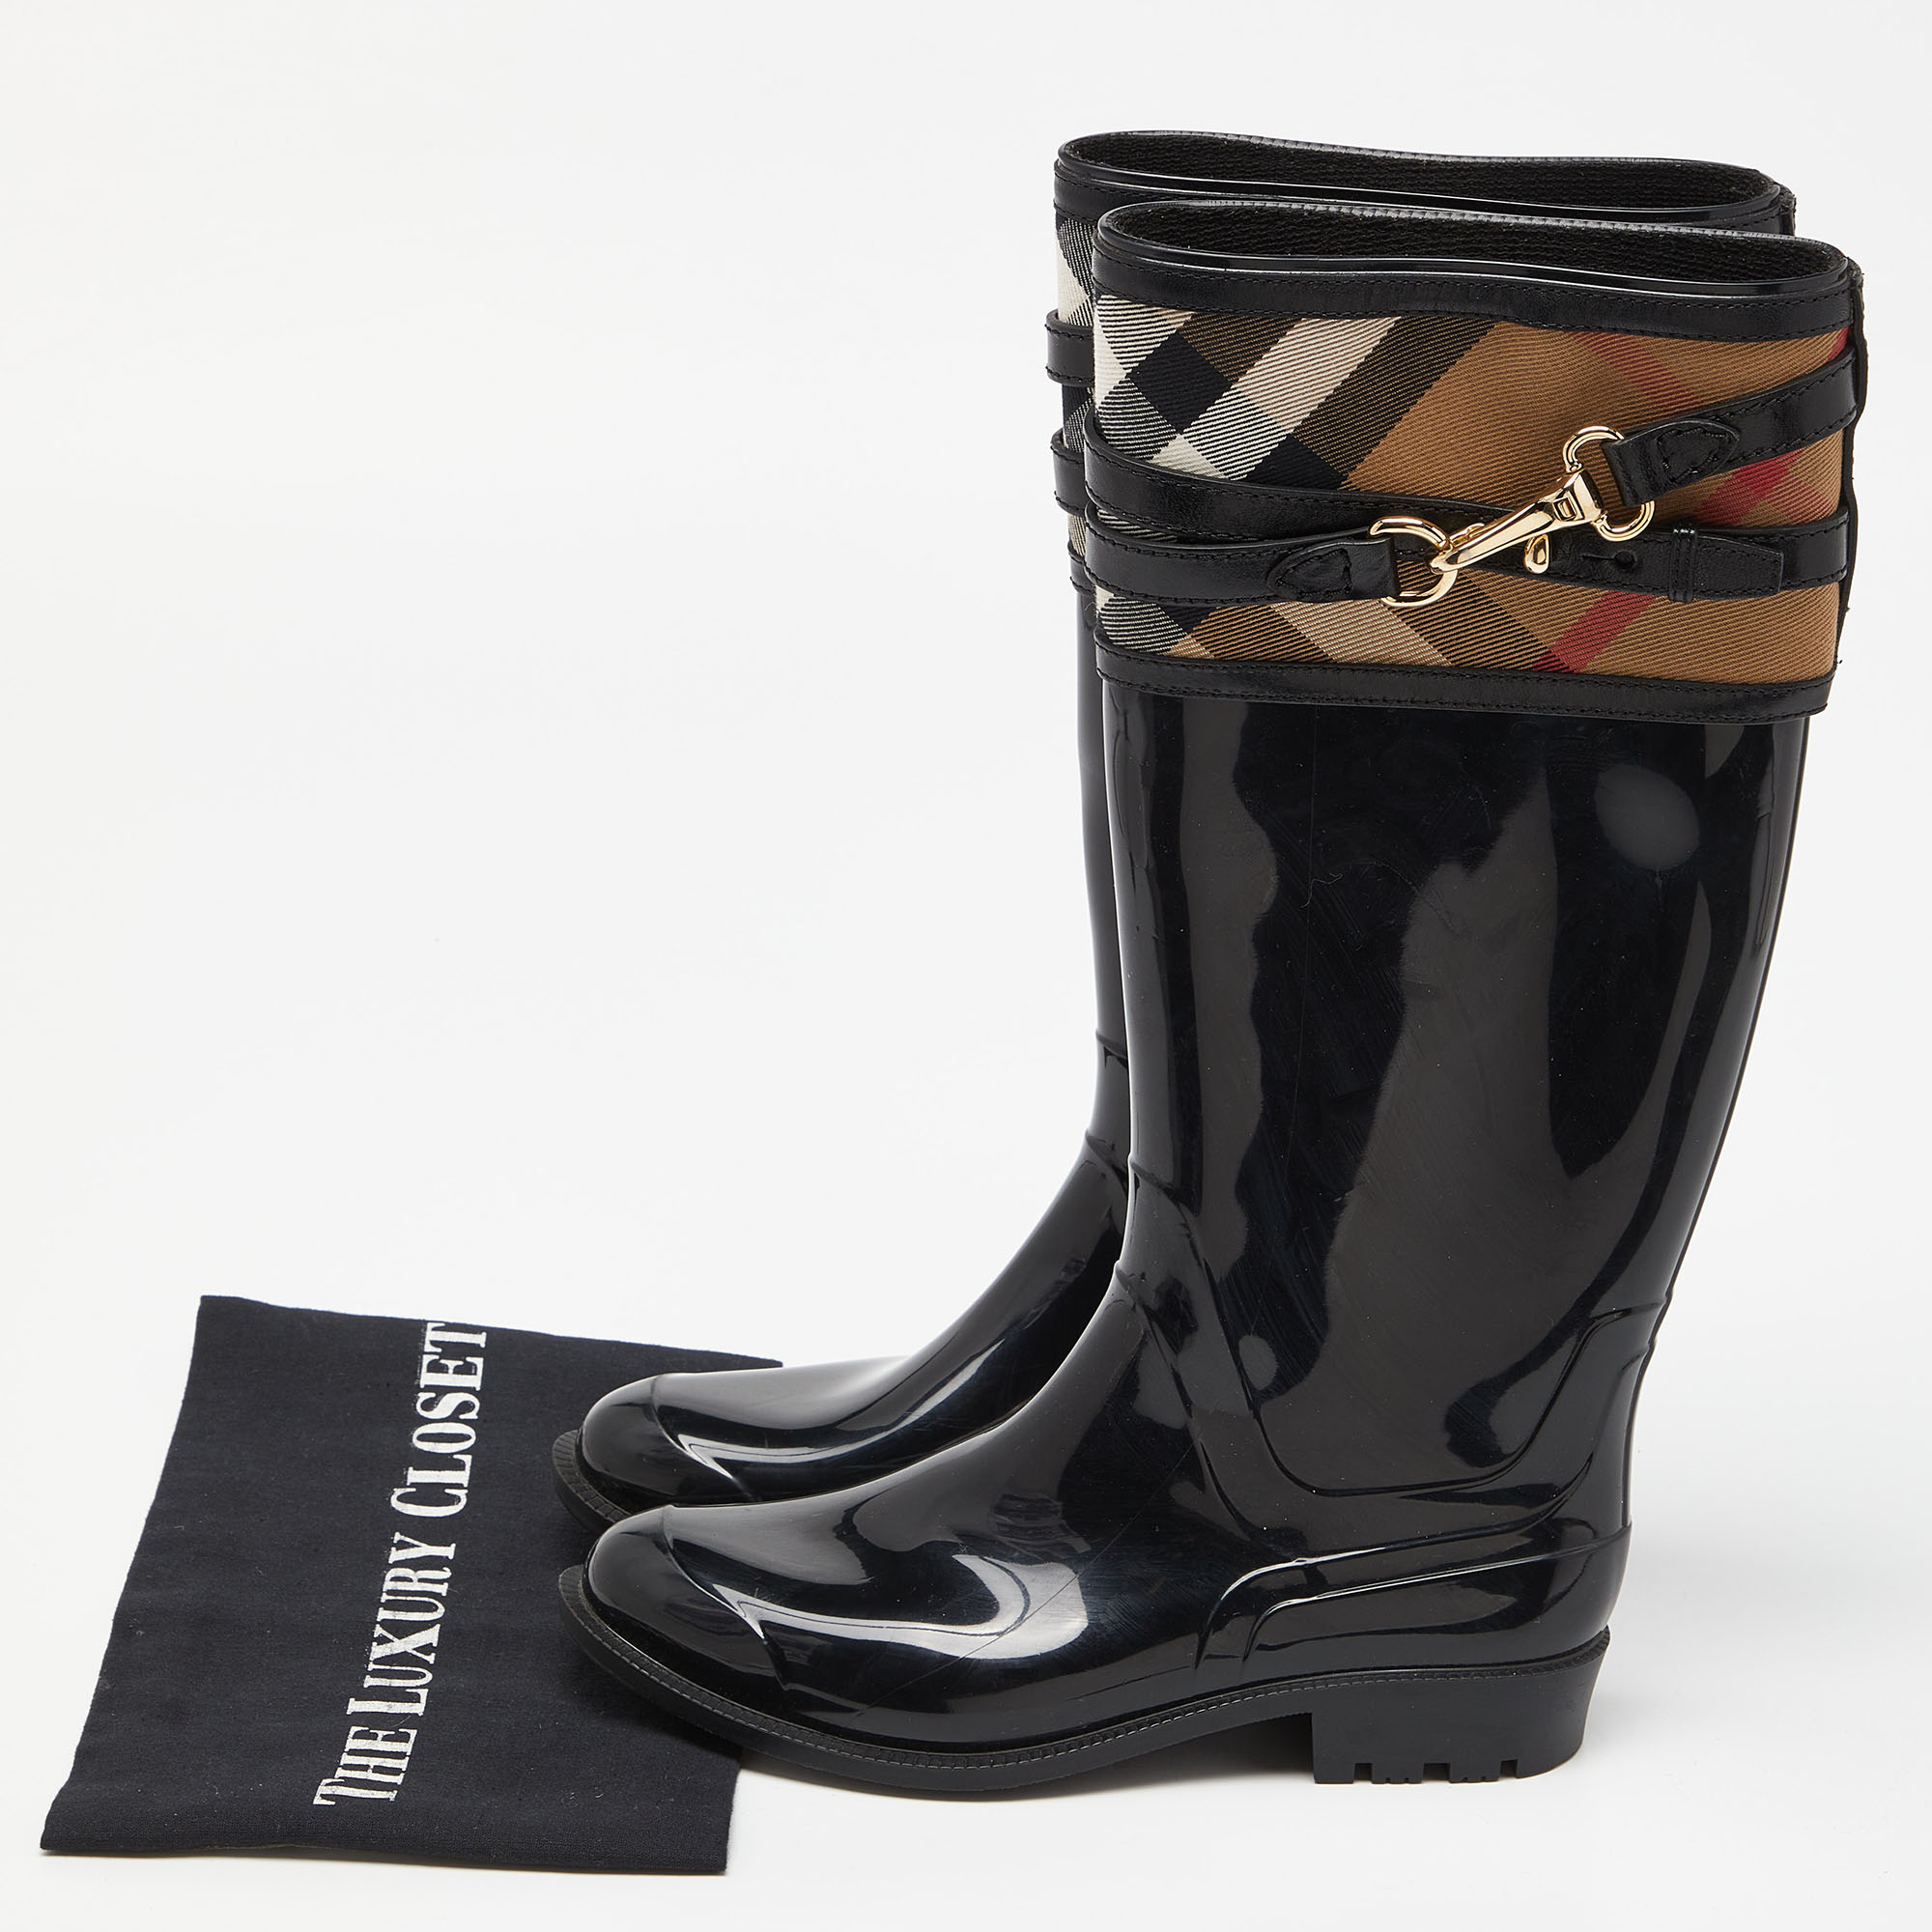 Burberry Black/Beige Patent Leather And House Check Canvas Knee Length Boots Size 35